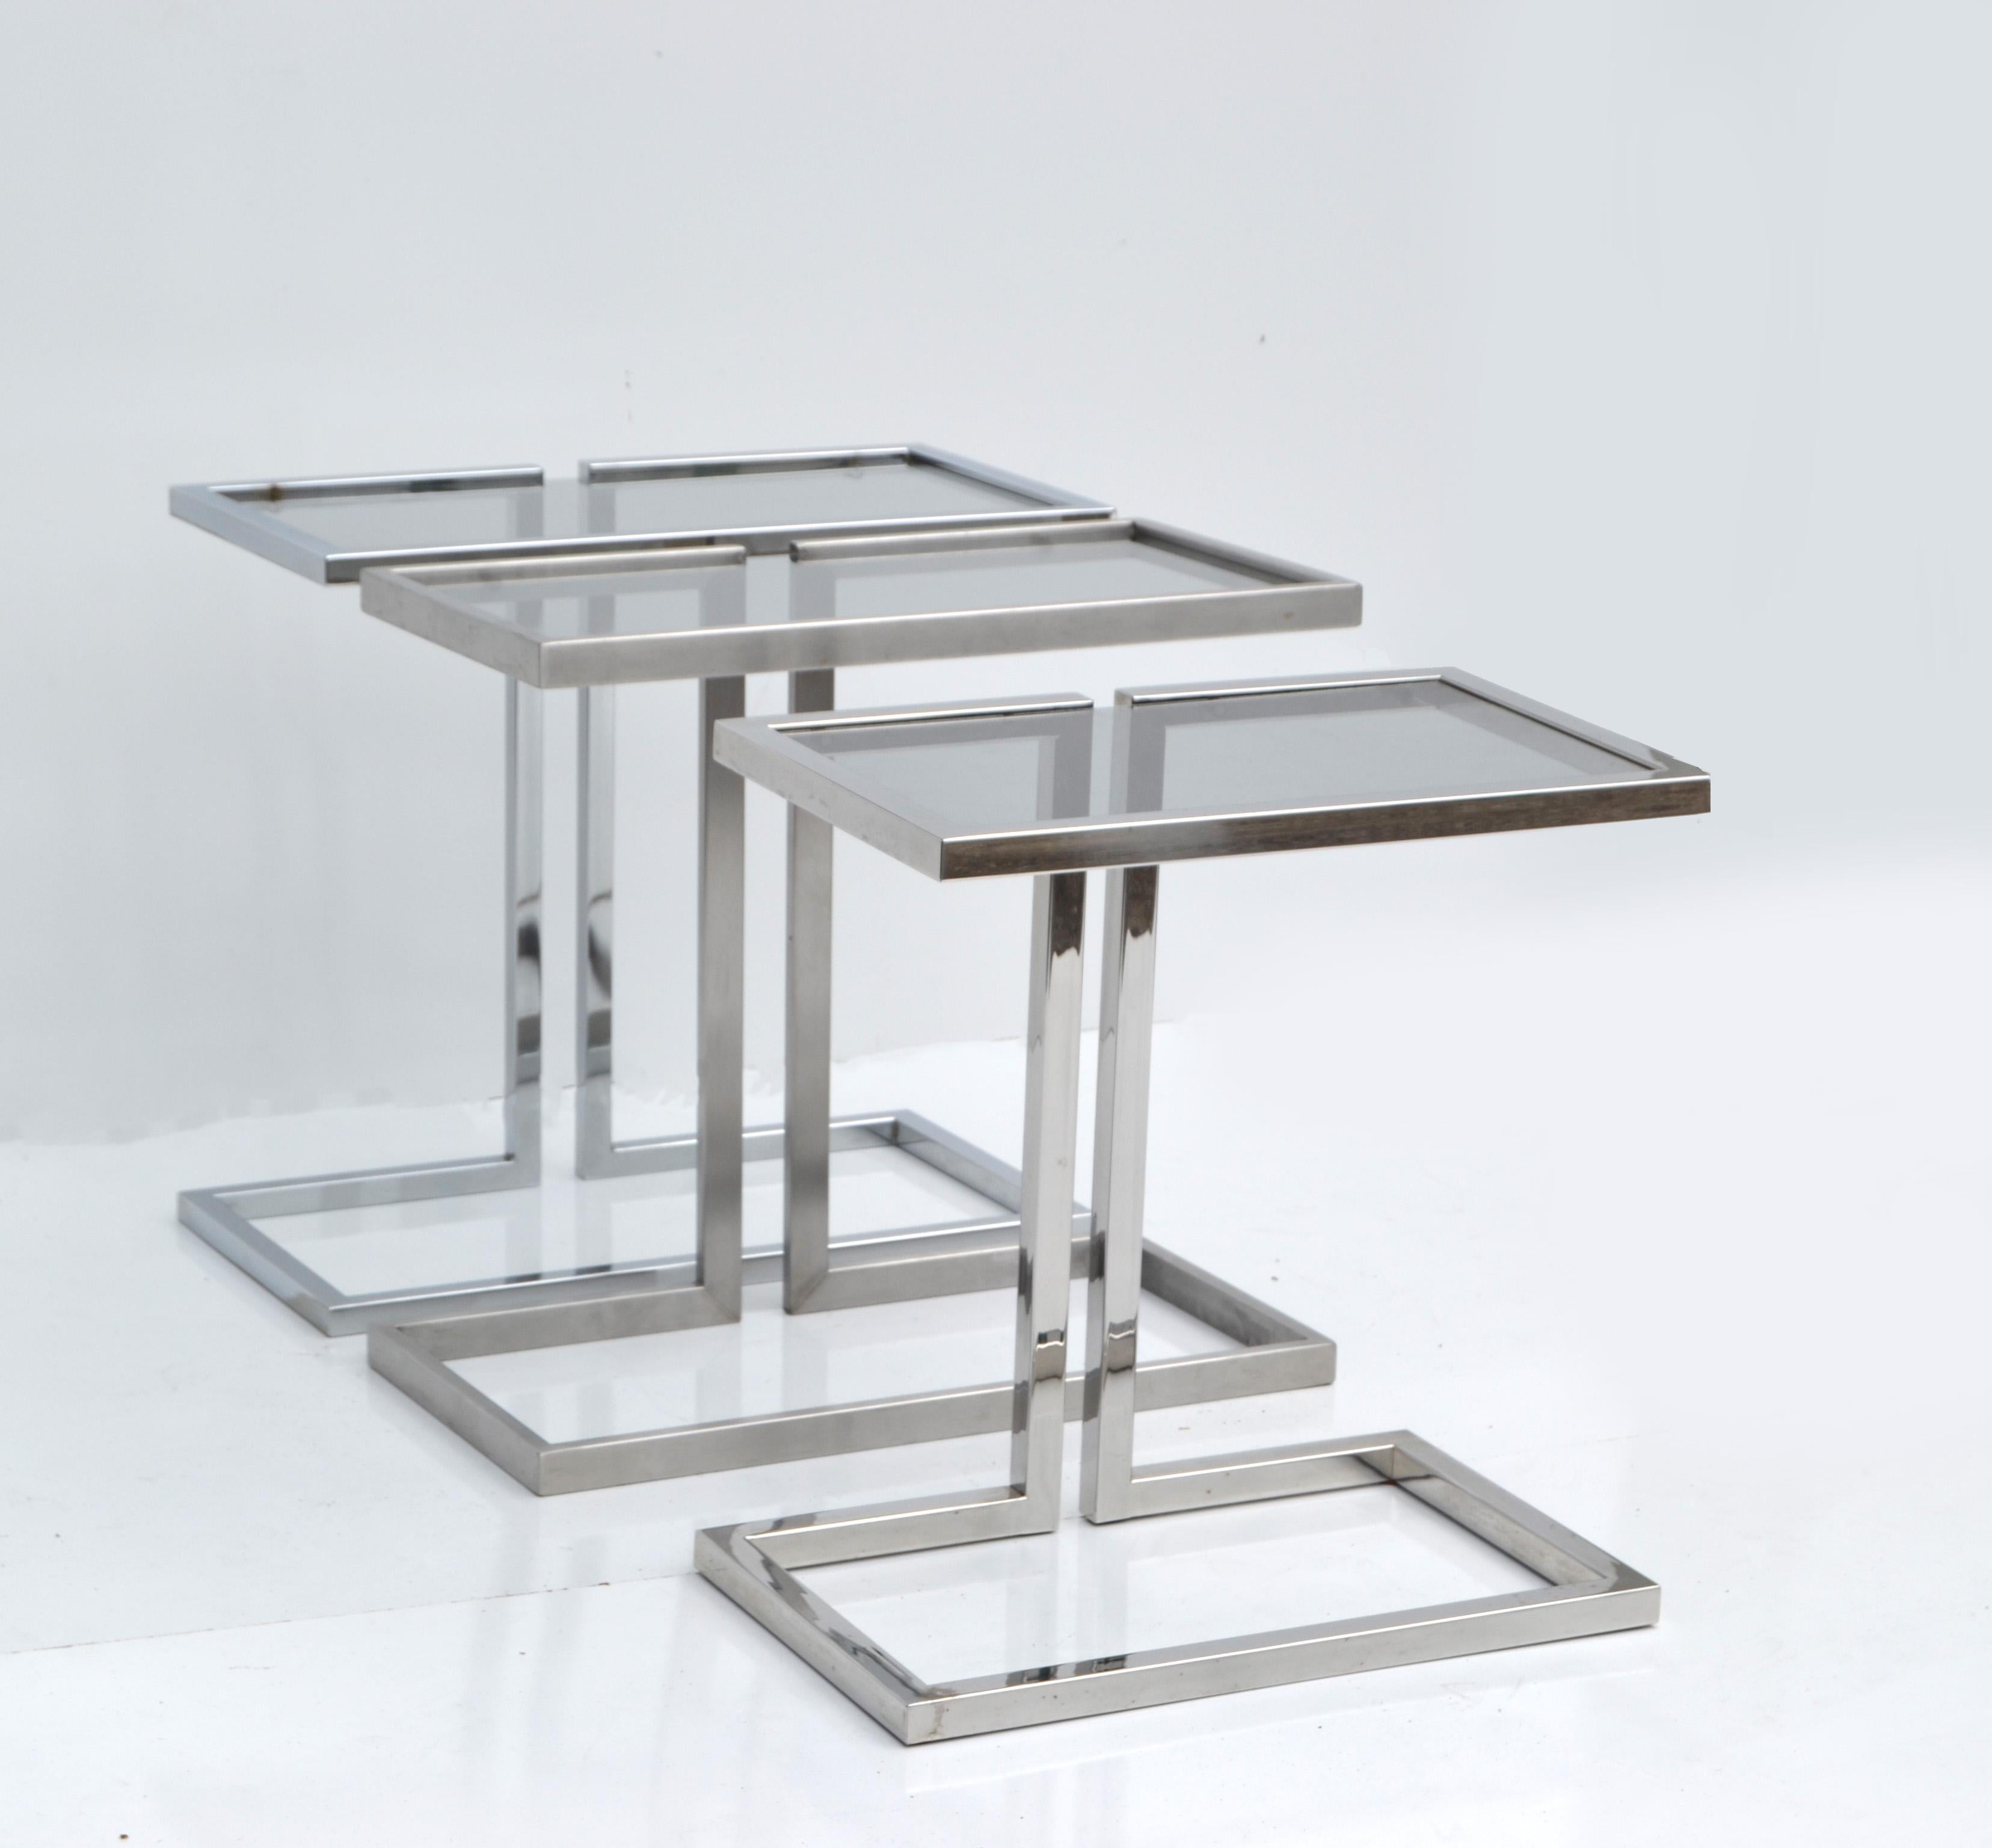 Guy Lefèvre 3 French Mid-Century Modern Silver Finish & Smoked Glass Top Table For Sale 1